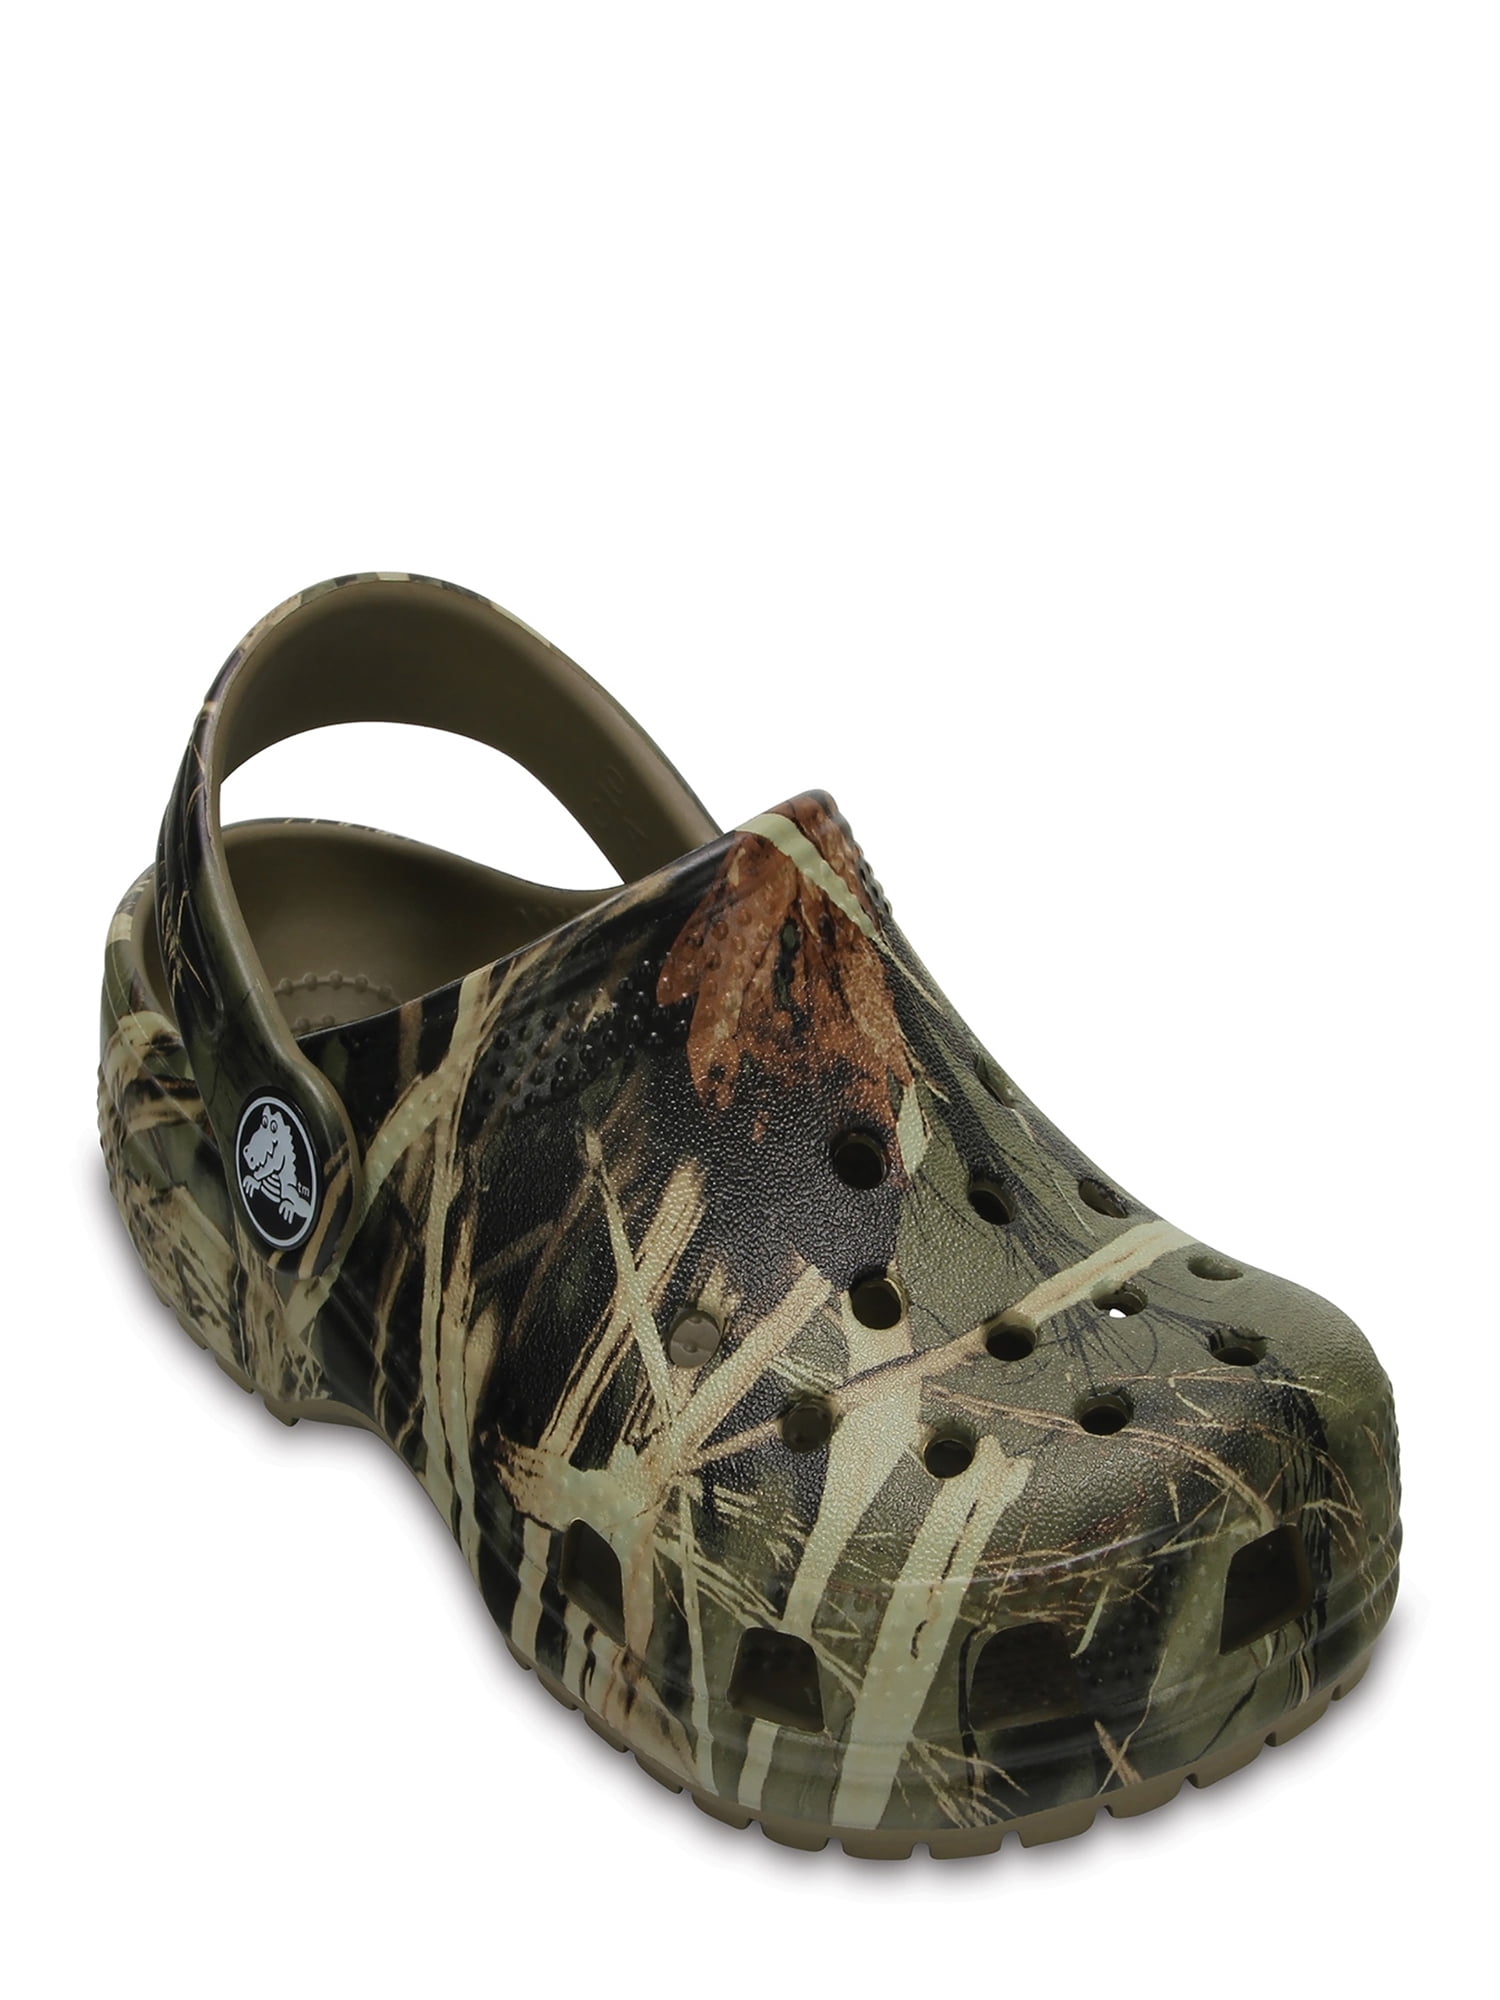 NEW Boy Youth Sizes  *4**5**6*  REALTREE Camo Flip Flops Thong Sandals REAL TREE 